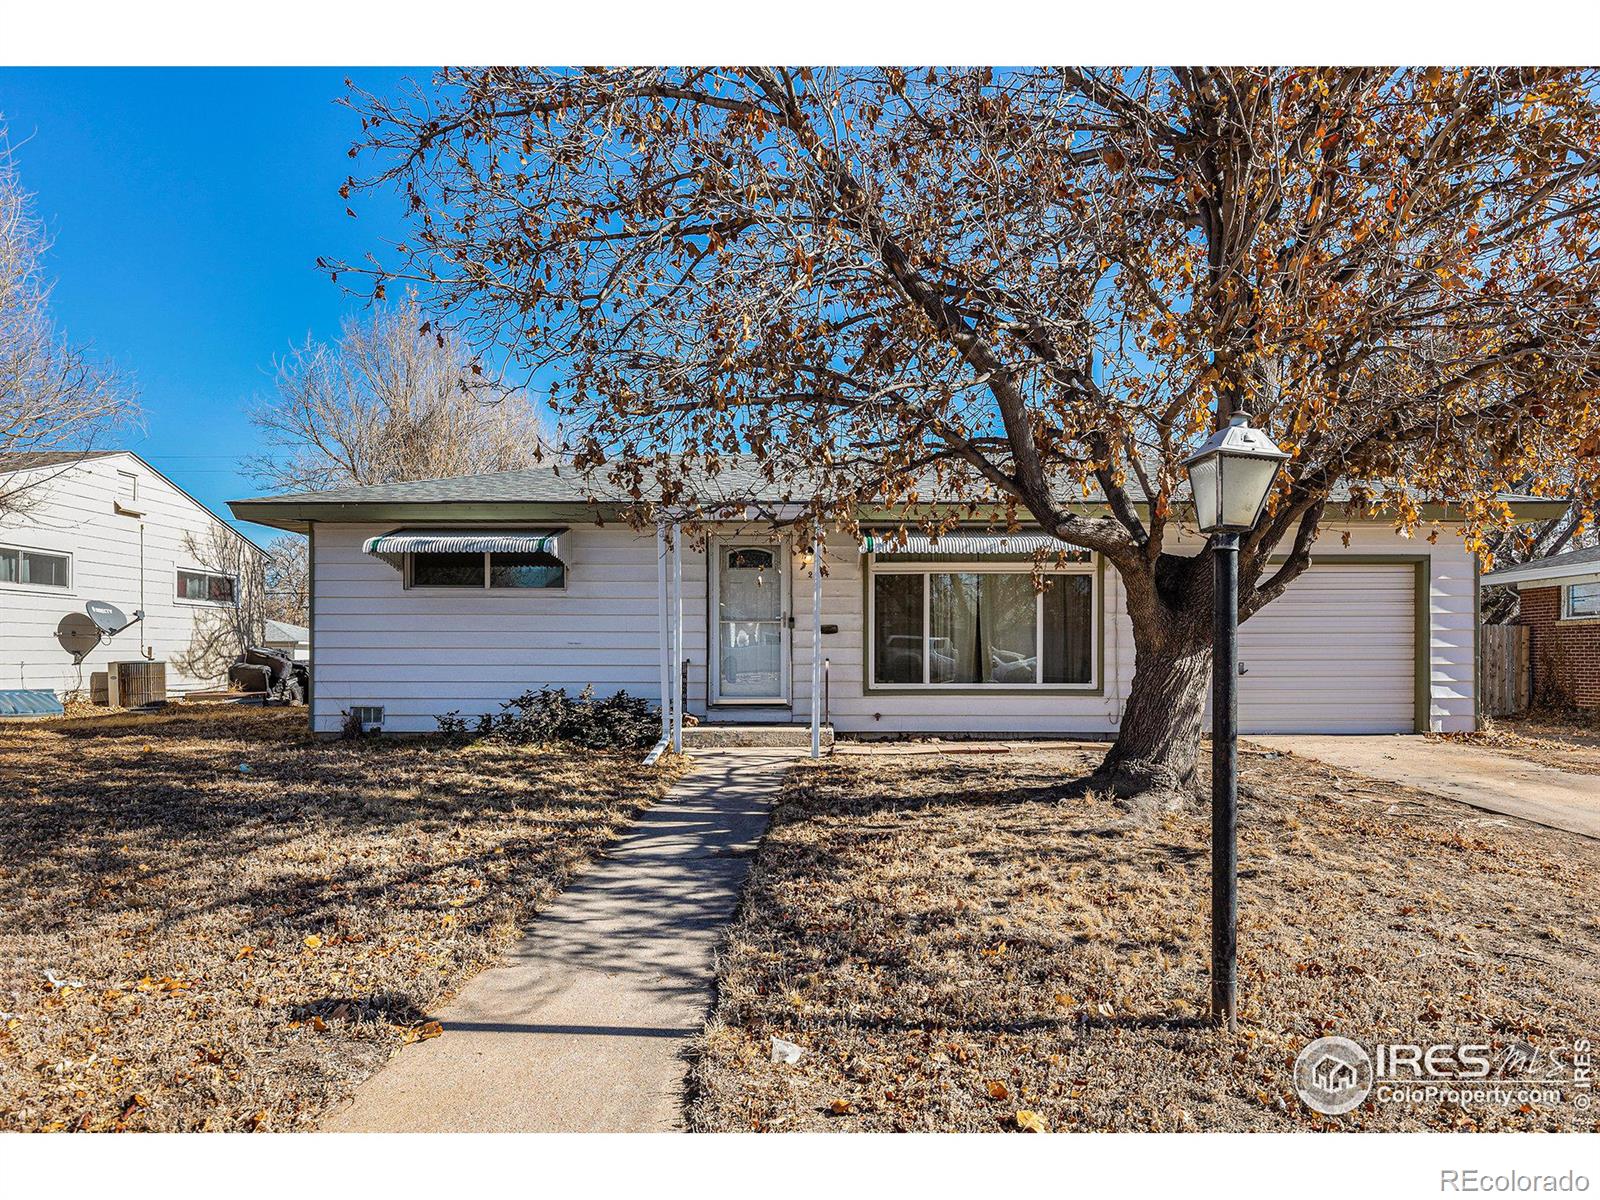 2534  15th Avenue, greeley MLS: 4567891002338 Beds: 2 Baths: 1 Price: $305,000